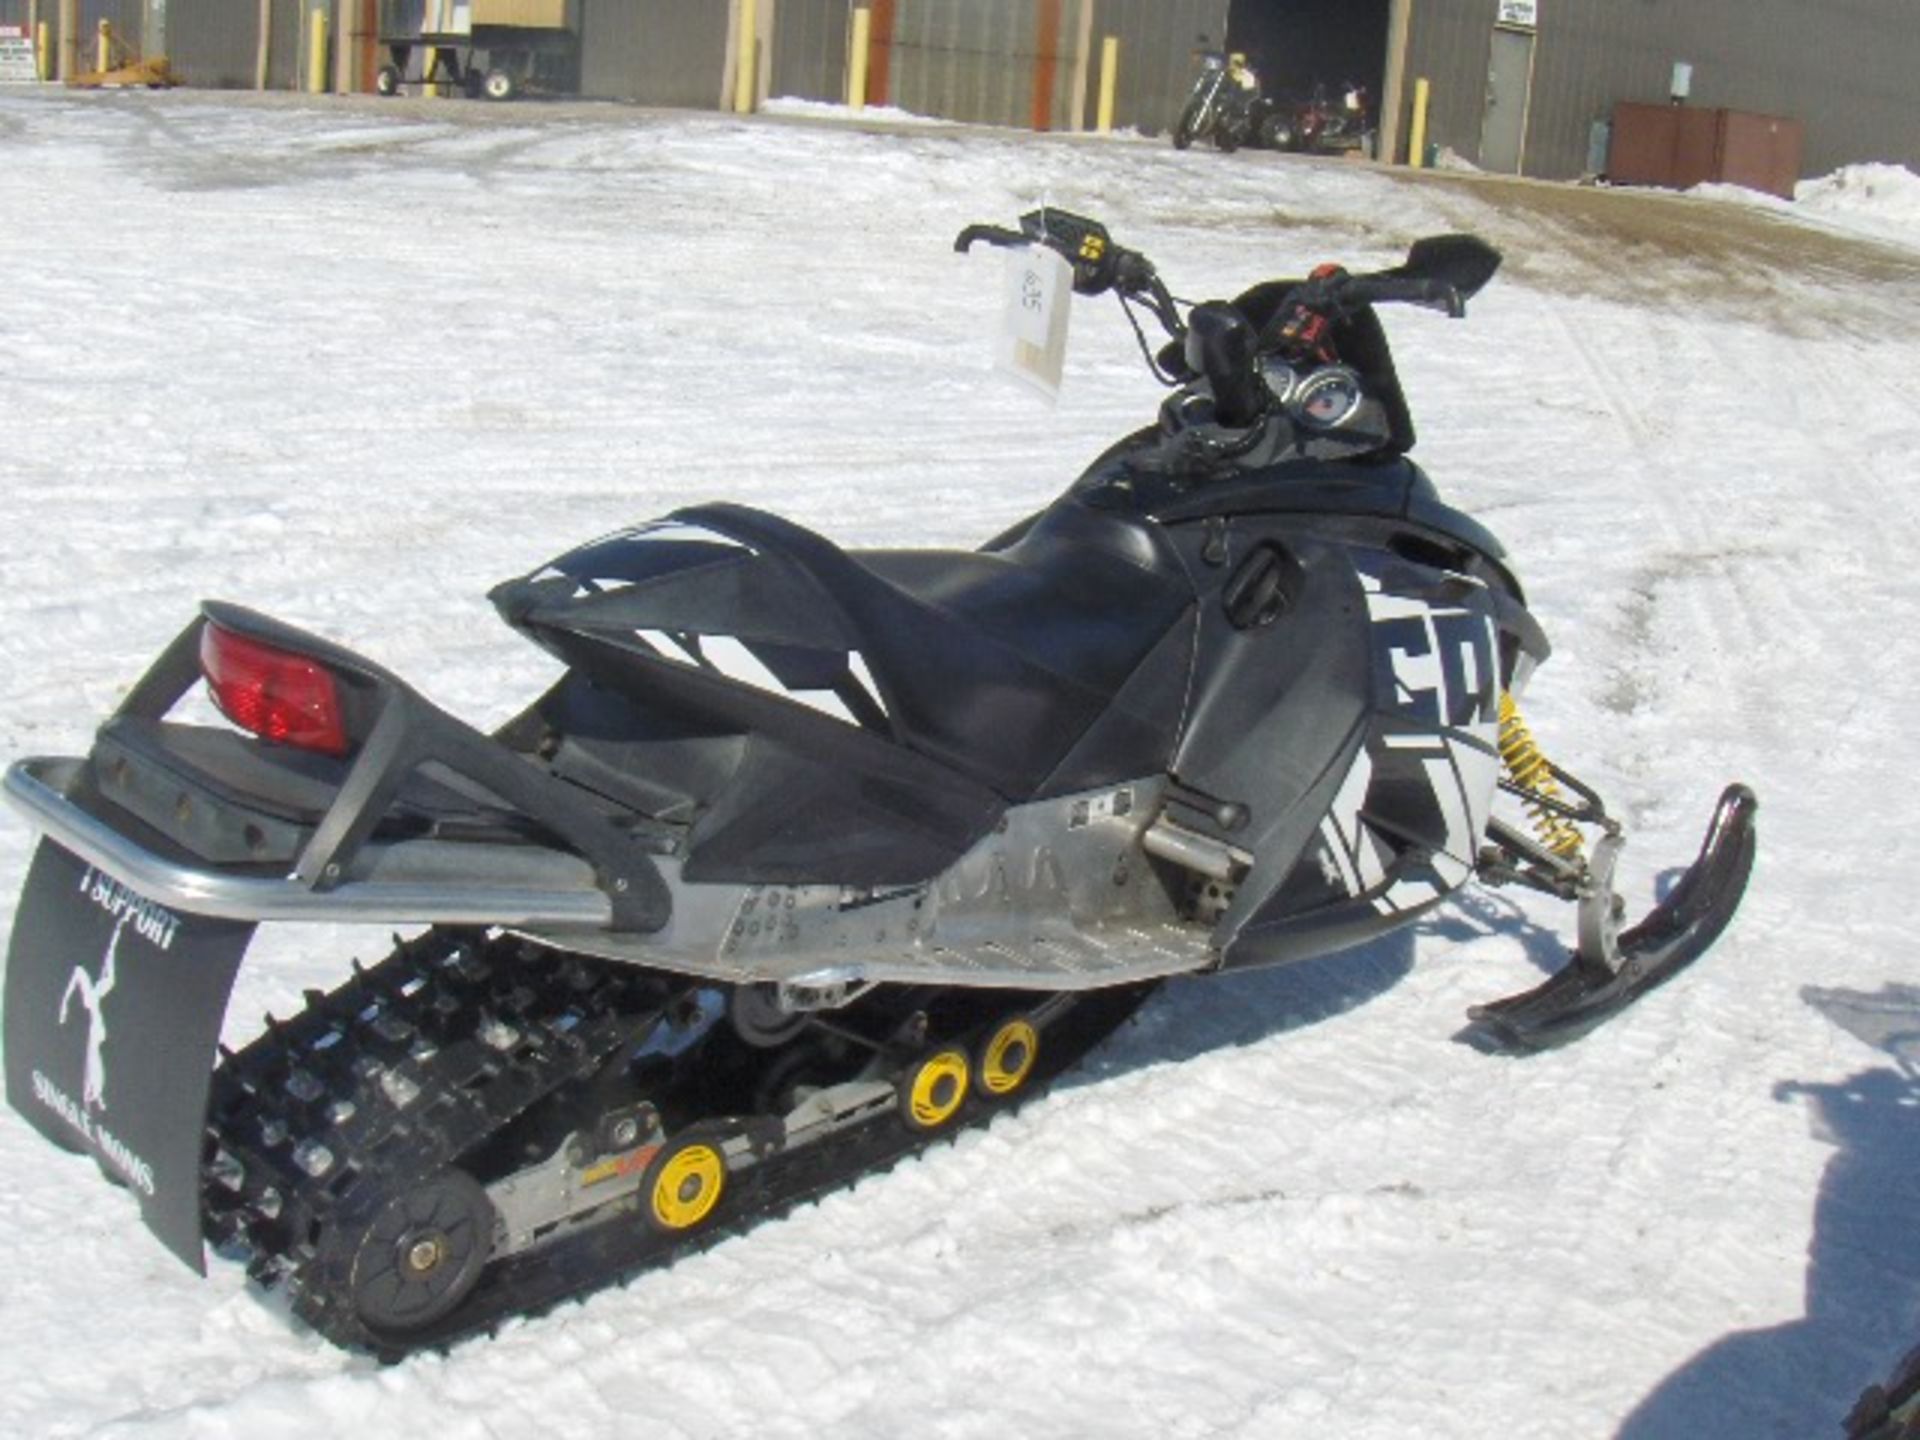 2003 SKI-DOO 800 REV 800 MXZ 2BPS226843V001102 Snowmobile, sold with a bill of sale only - Image 3 of 3